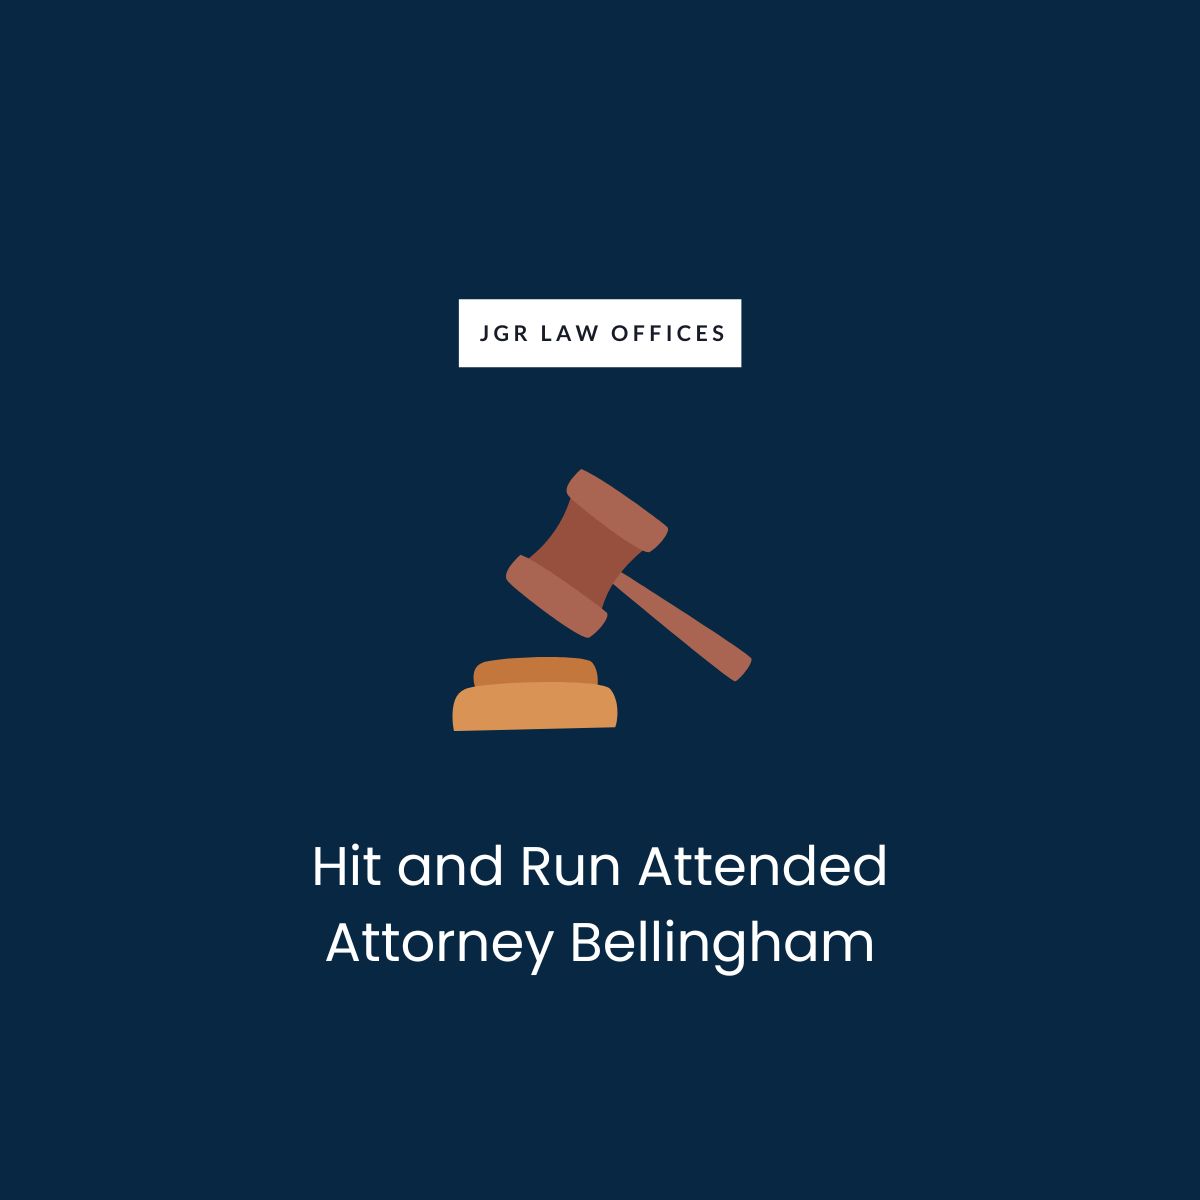 Hit and Run Attended Attorney Bellingham